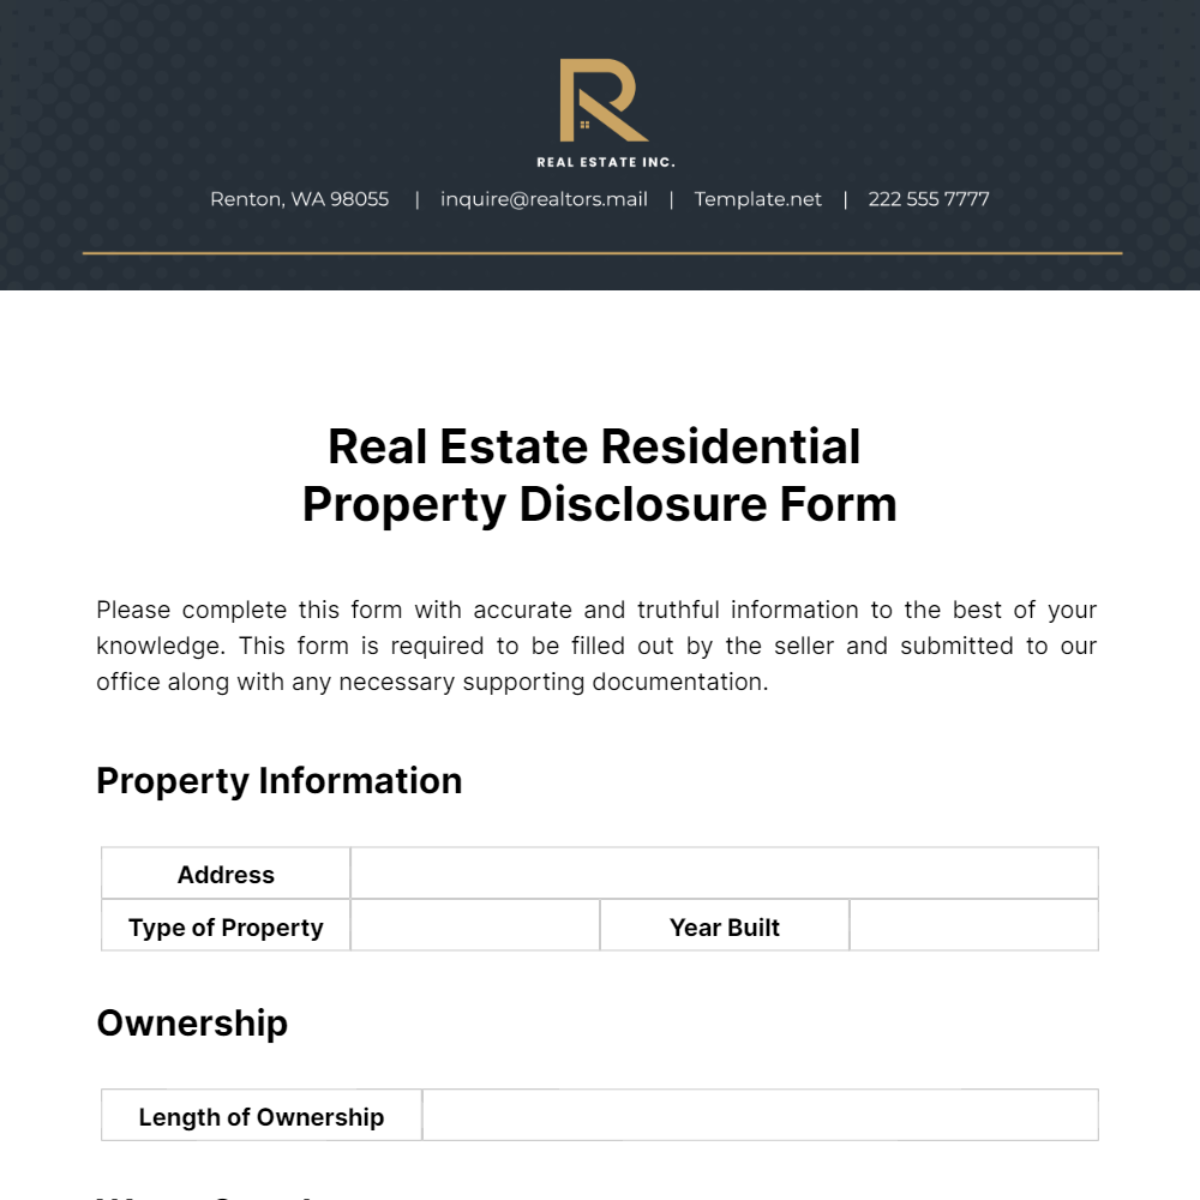 Real Estate Residential Property Disclosure Form Template